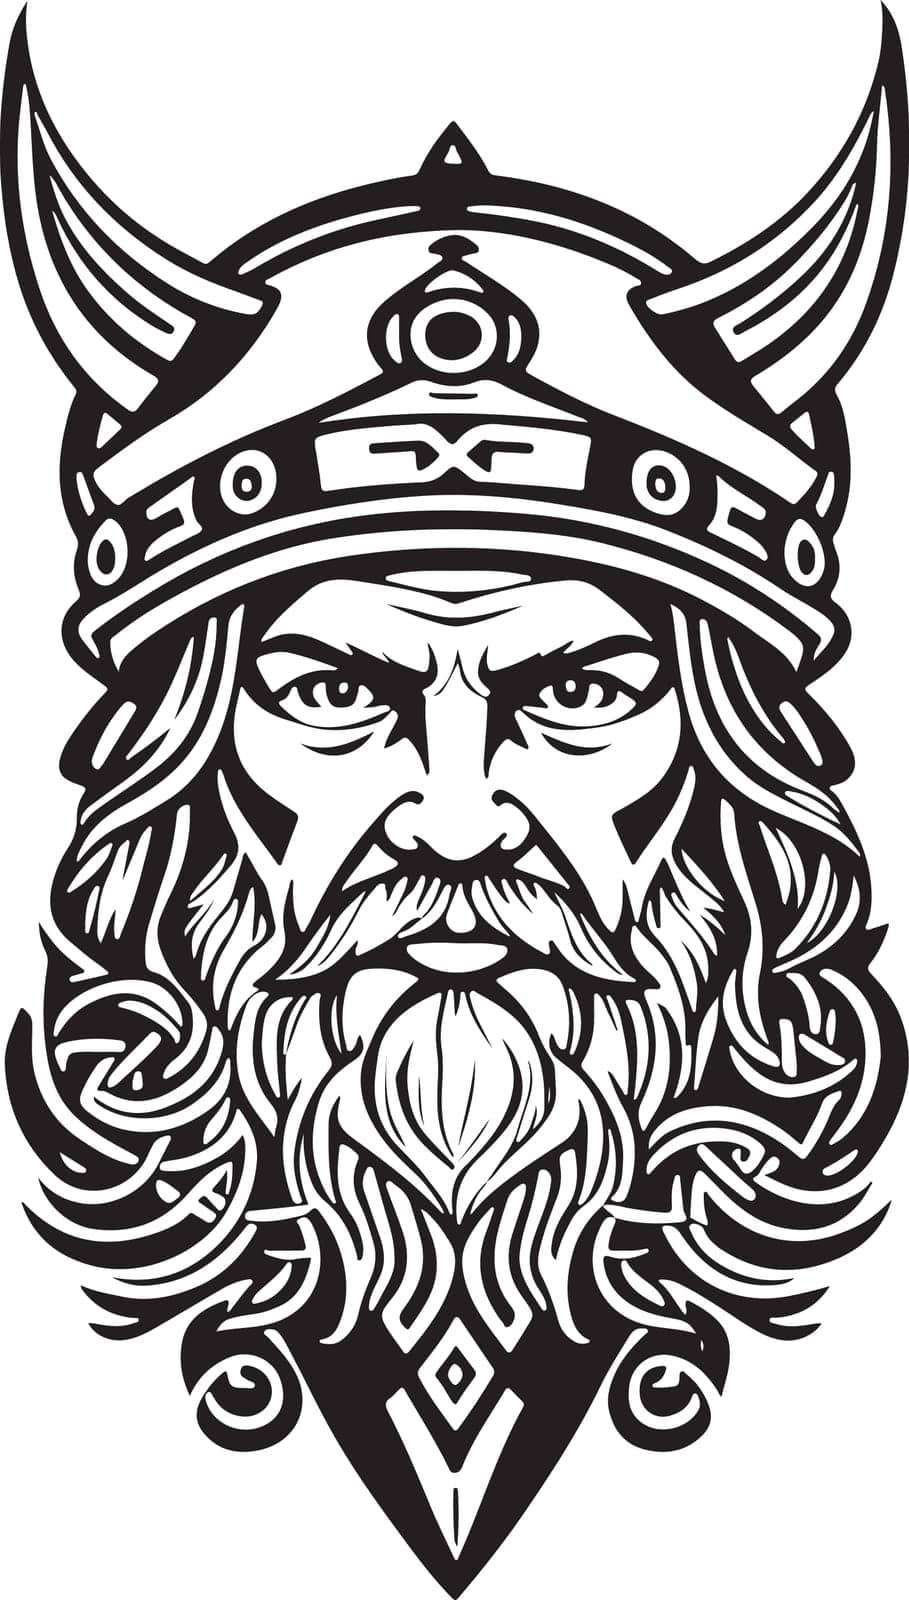 Fantastic line art style Viking head vector graphic template, Suitable for logo design, tattoo design or print on demand by luisalfonso89